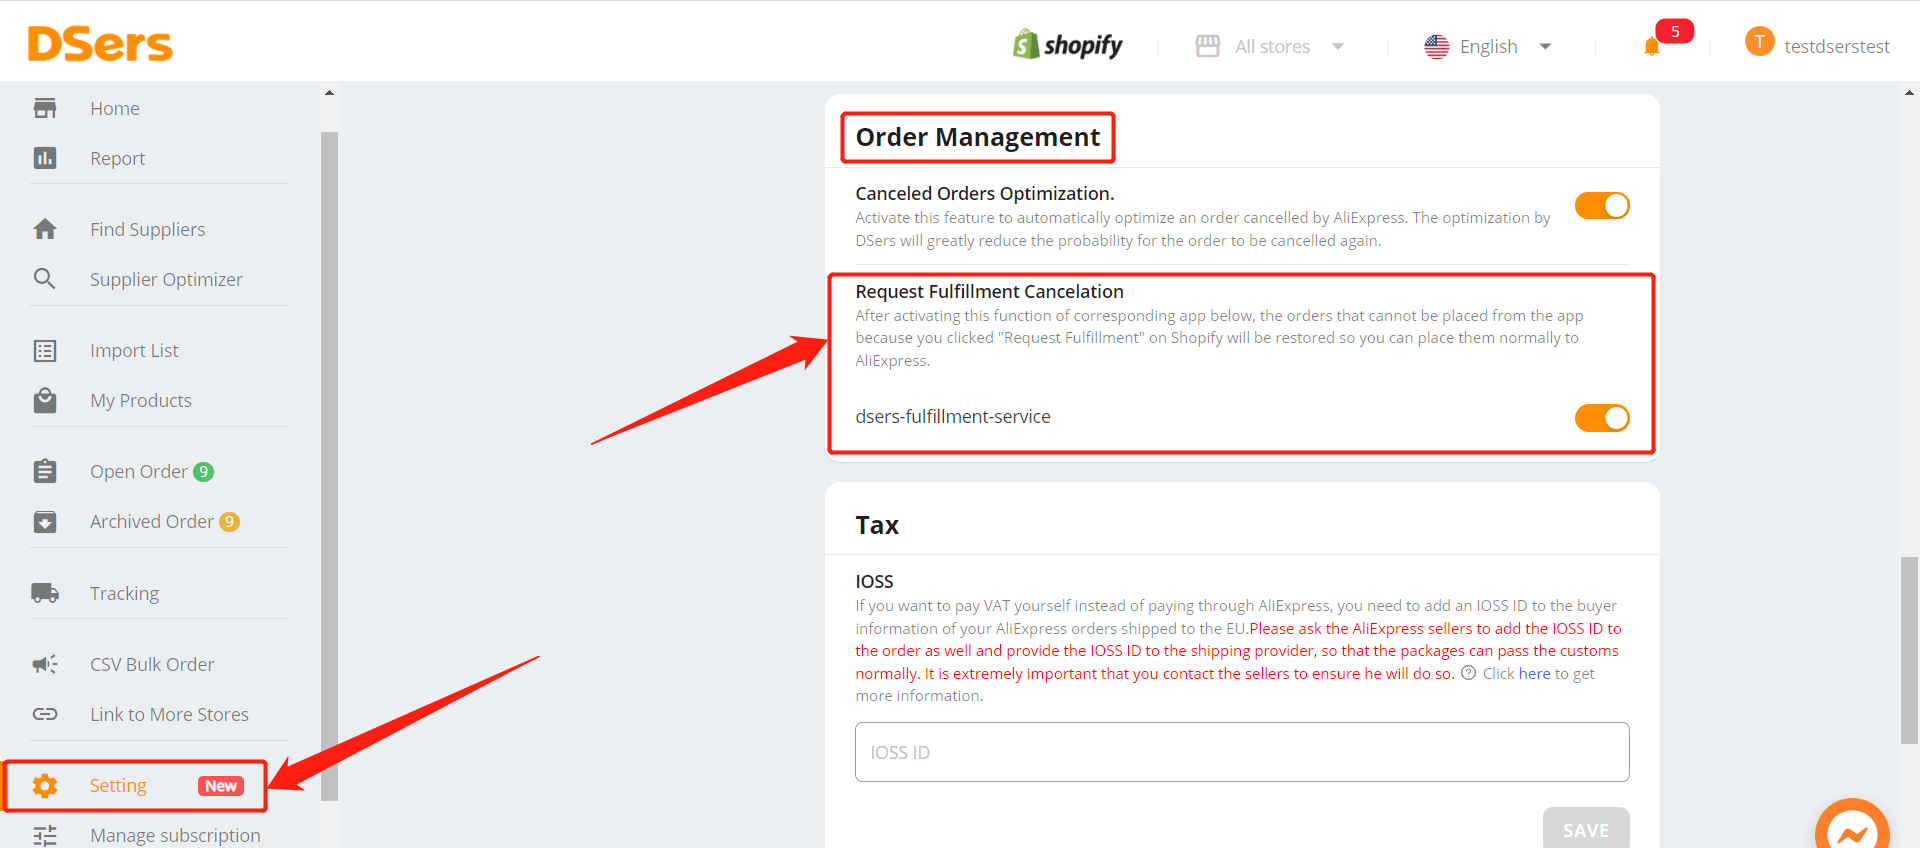 Why I should not request fulfillment on Shopify - How to fix it - Shopify DSers